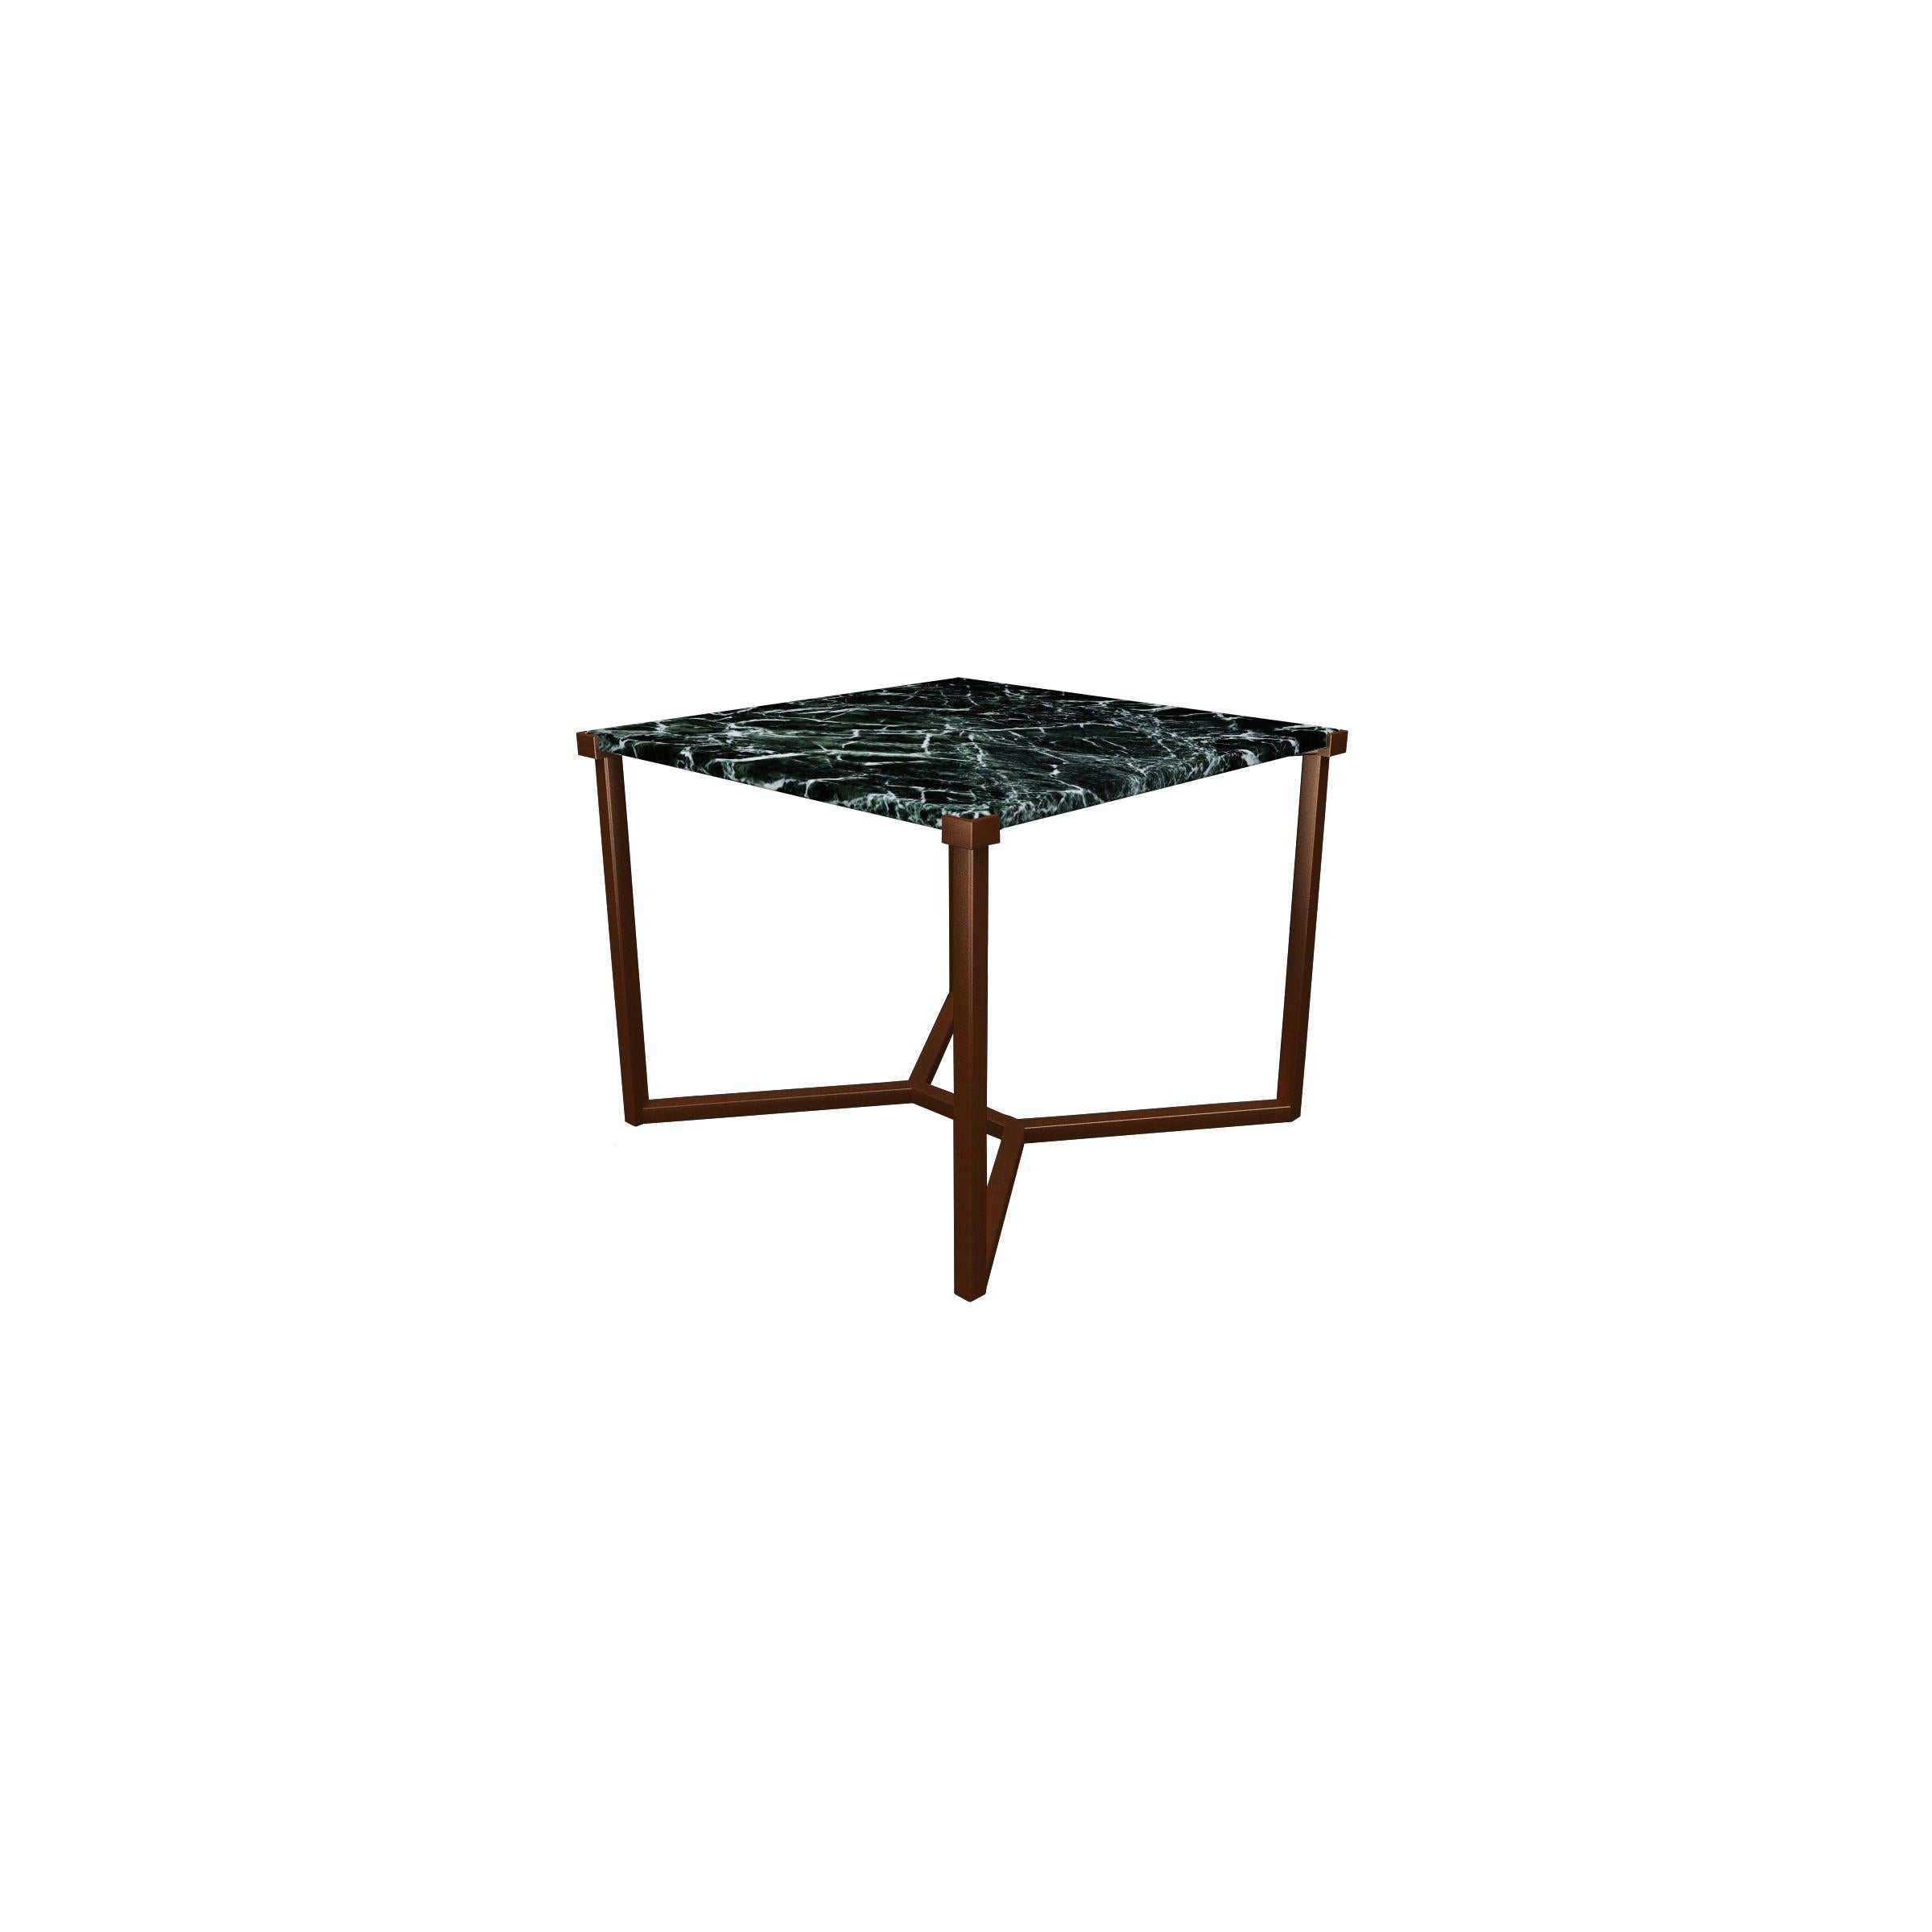 Chinese NORDST TEDDY Side Table, Italian Grey Rain Marble, Danish Modern Design, New For Sale